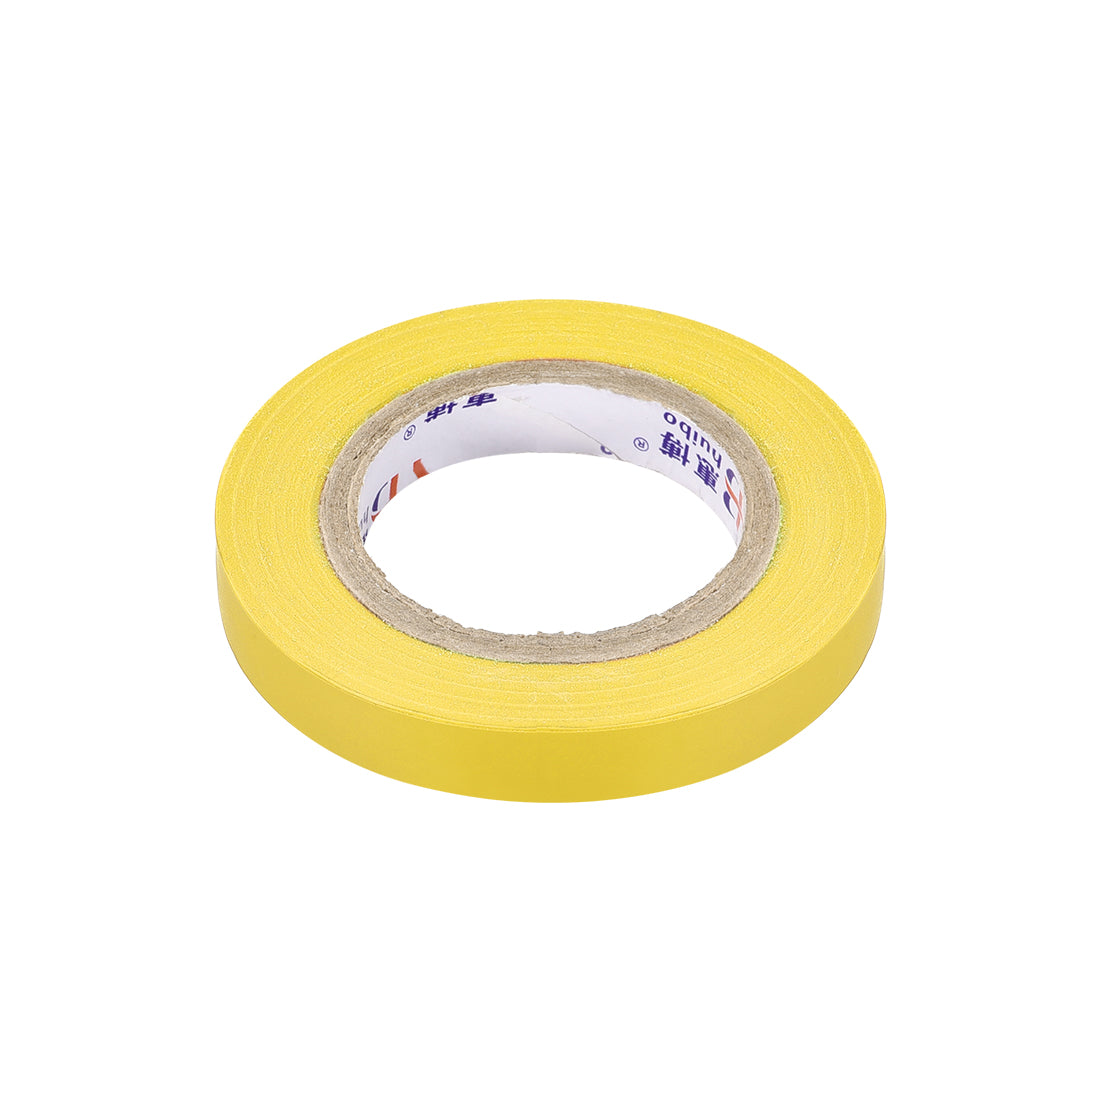 uxcell Uxcell Insulating Tape 10mm Width 14.5M Long 0.15mm Thick PVC Electrical Tape Rated for Max. 400V  80C Use Yellow 2pcs